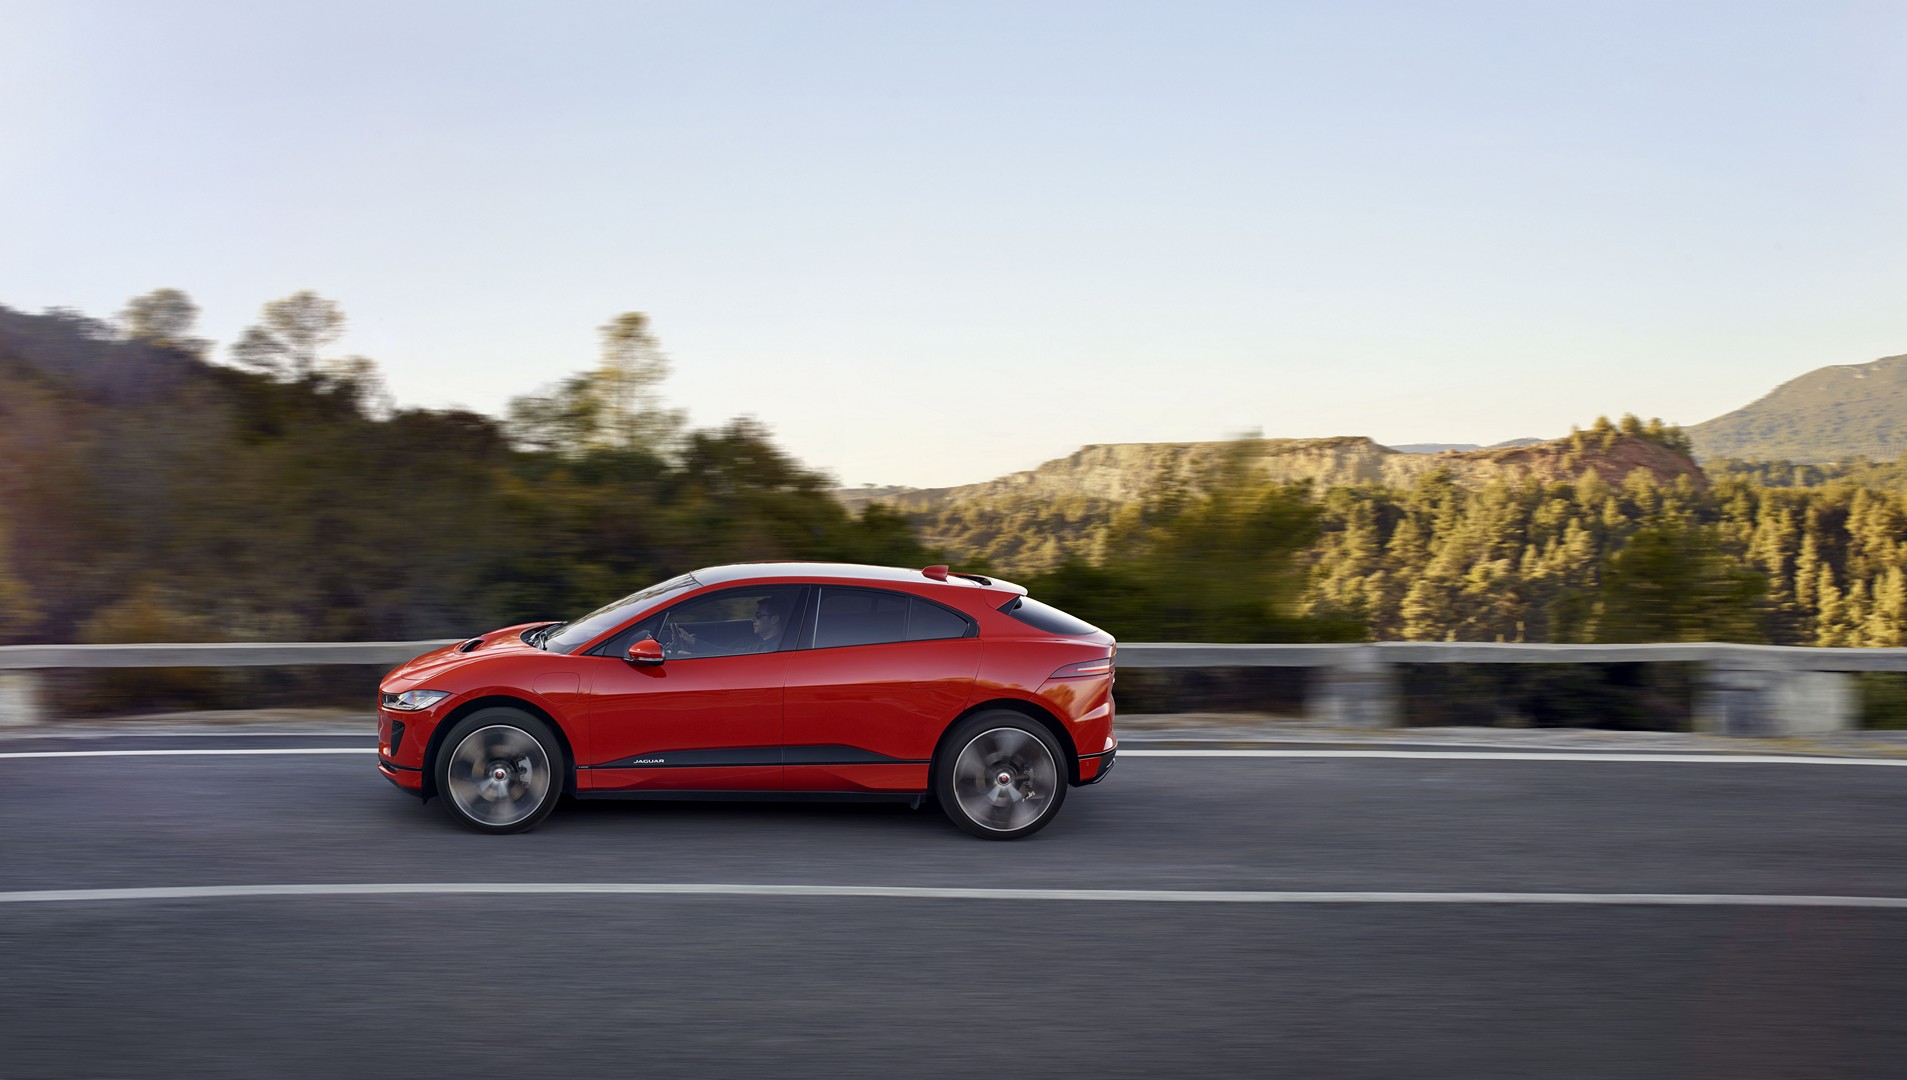 https://s1.cdn.autoevolution.com/images/news/gallery/2020-jaguar-i-pace-update-offers-234-miles-of-range-thanks-to-etrophy-know-how_78.jpg